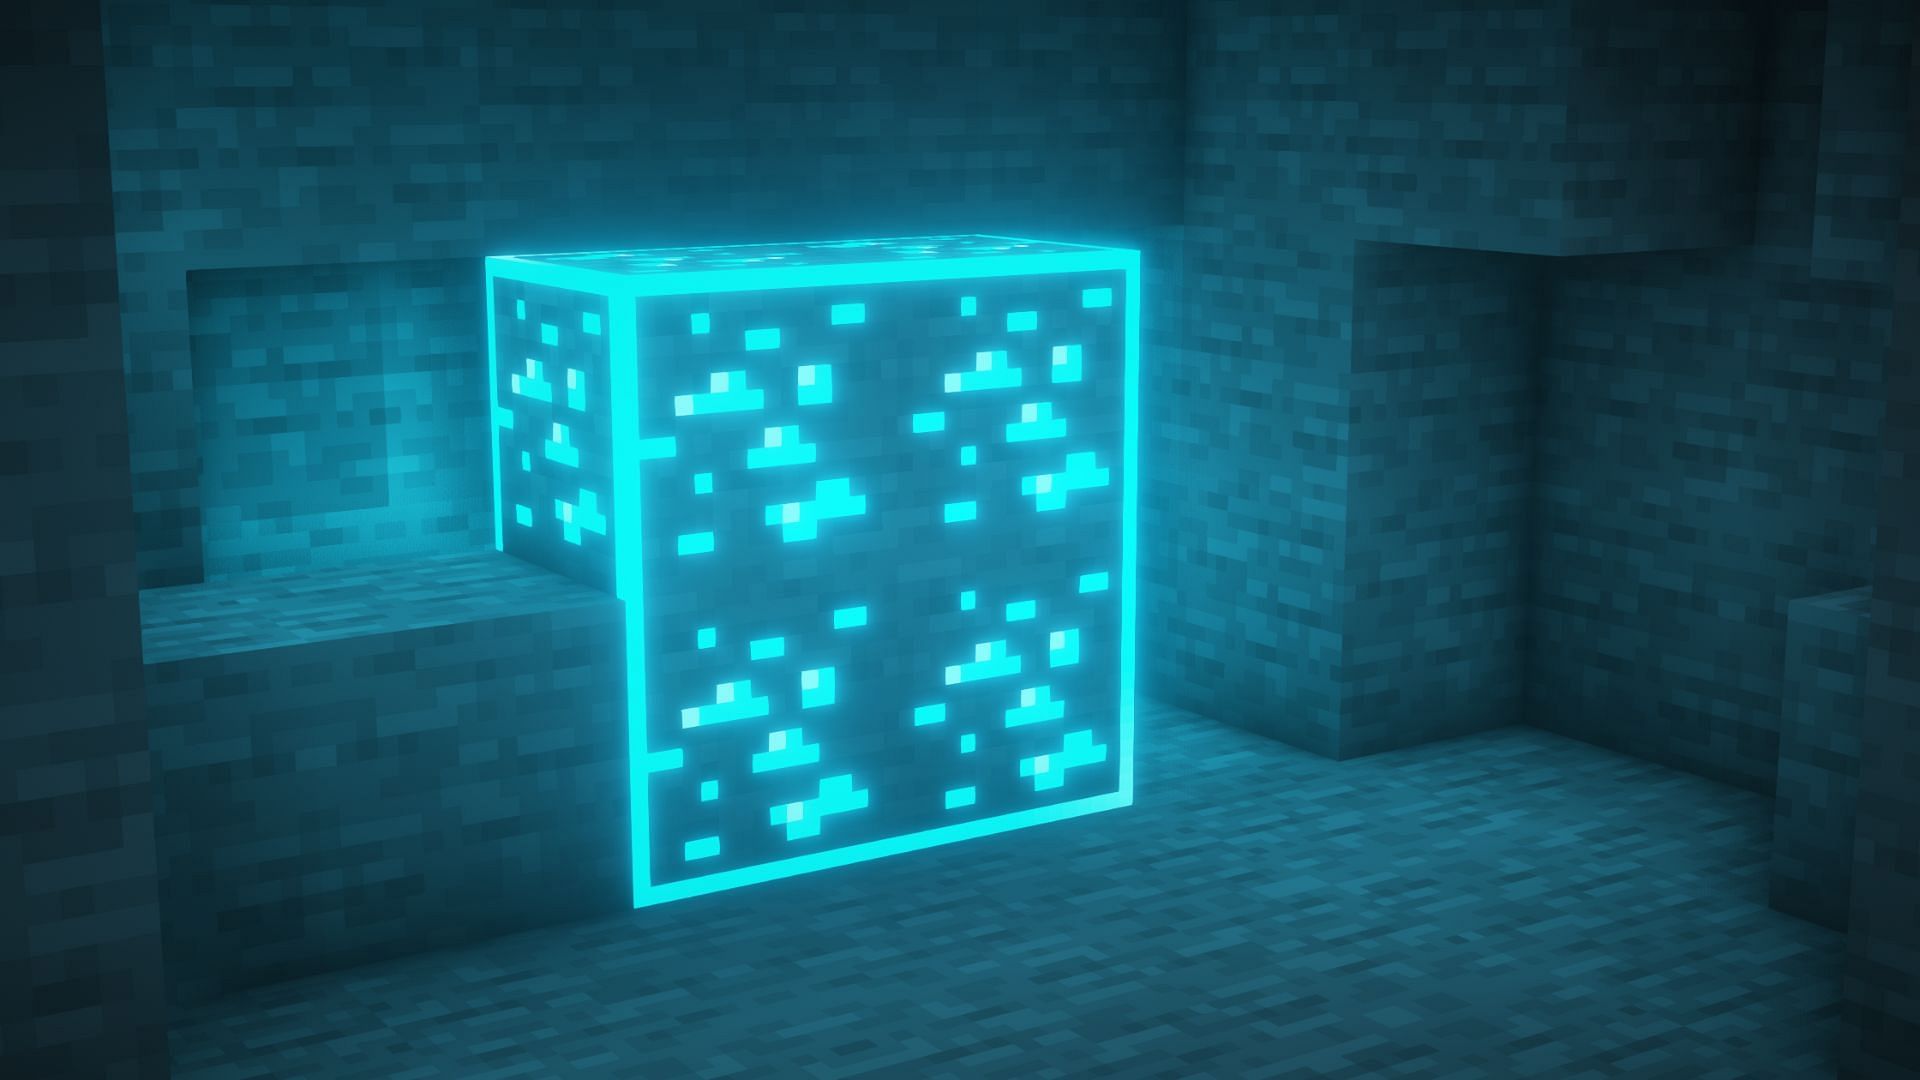 Diamond ore in the visible ores texture pack for Minecraft (Image via Techy69/CurseForge)